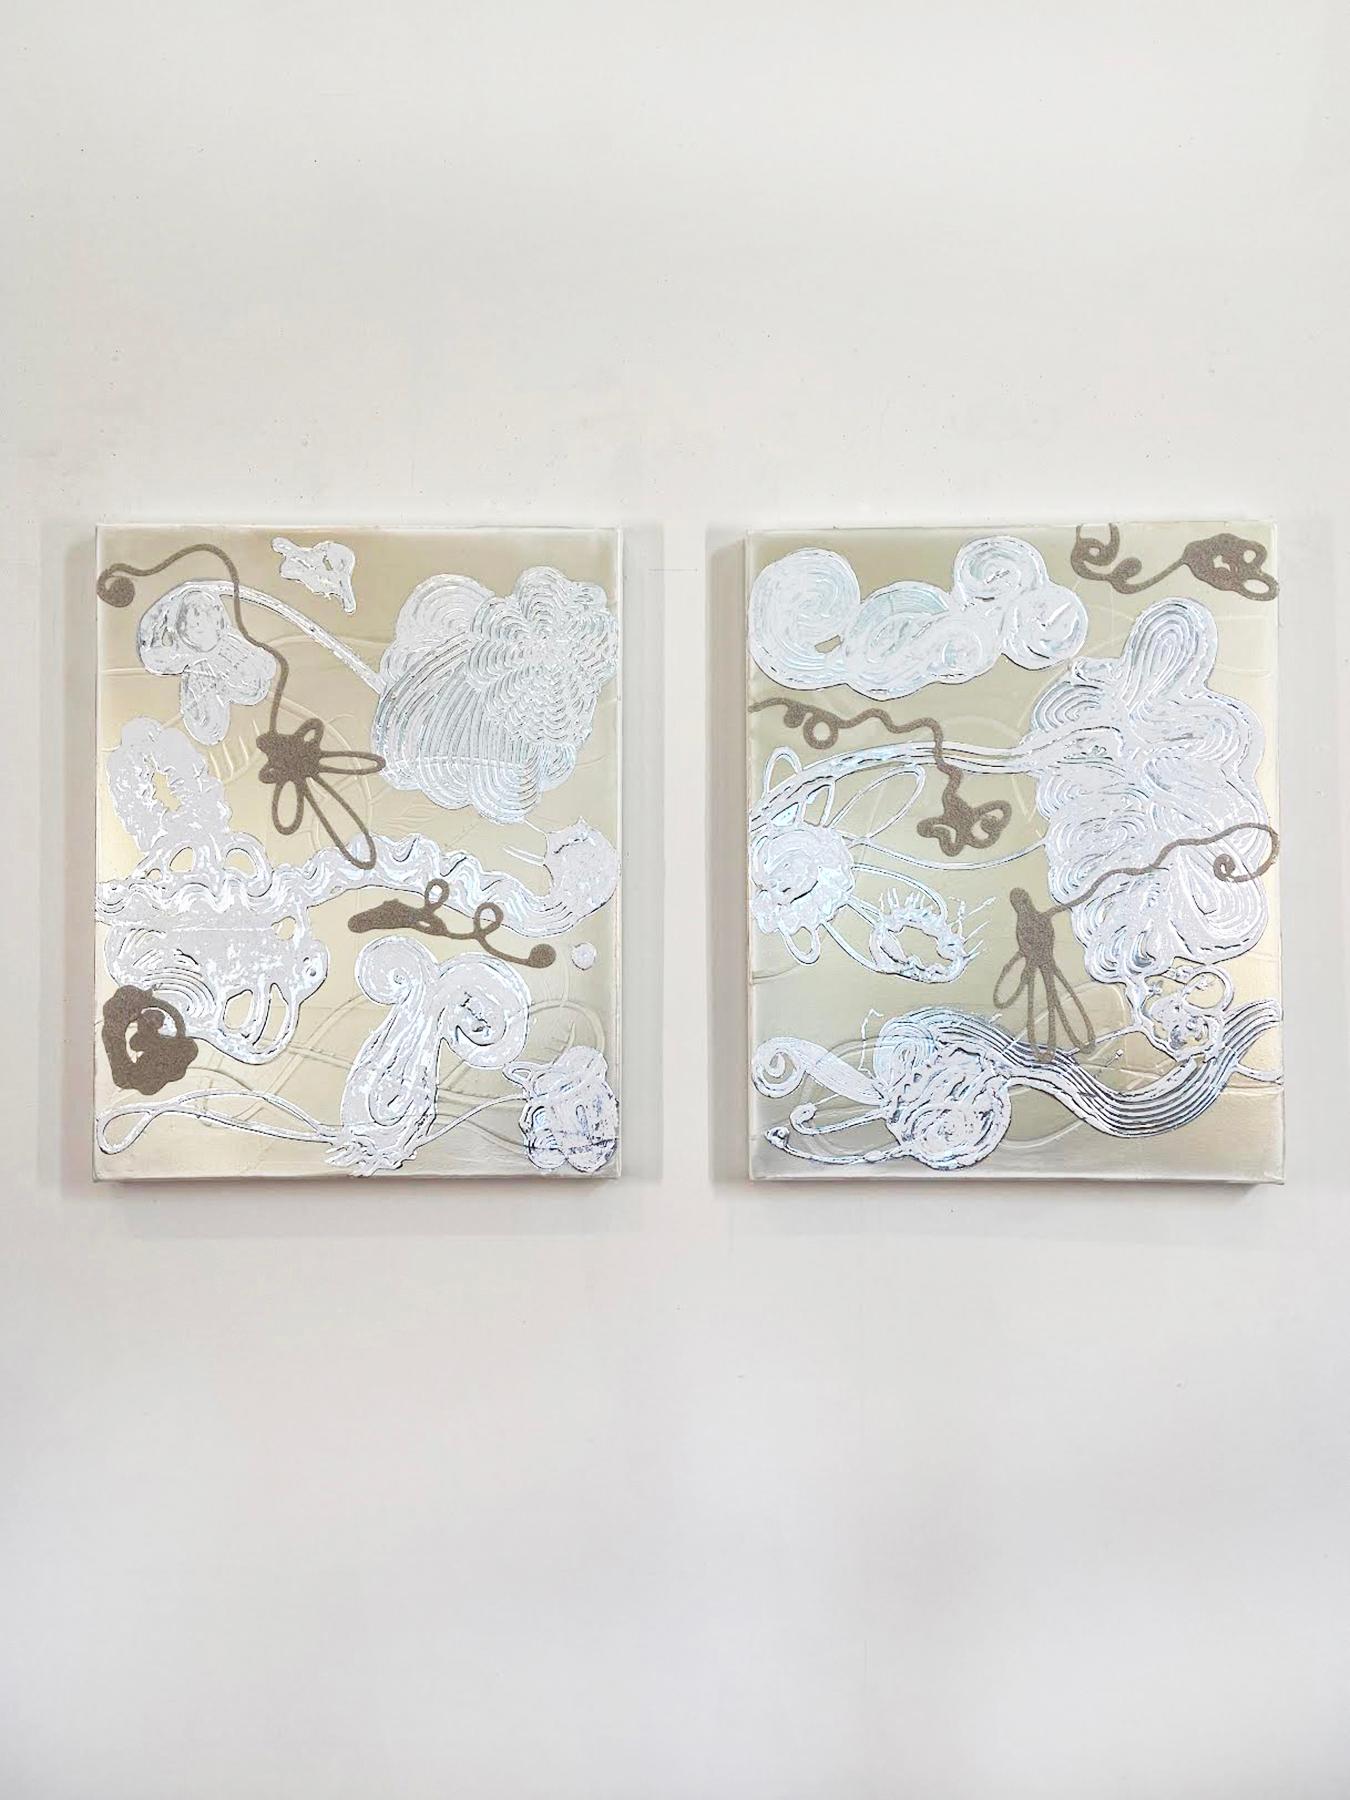 Available at Madelyn Jordon Fine Art. 'Blue/Gold/Silver Mica Painting (Flower Float no. 1)' 2024 by Catherine Howe. Interference pigments, acrylic, glass micro beads, aluminum leaf, and white leaf on canvas, 30 x 24 in. This painting features Howe's